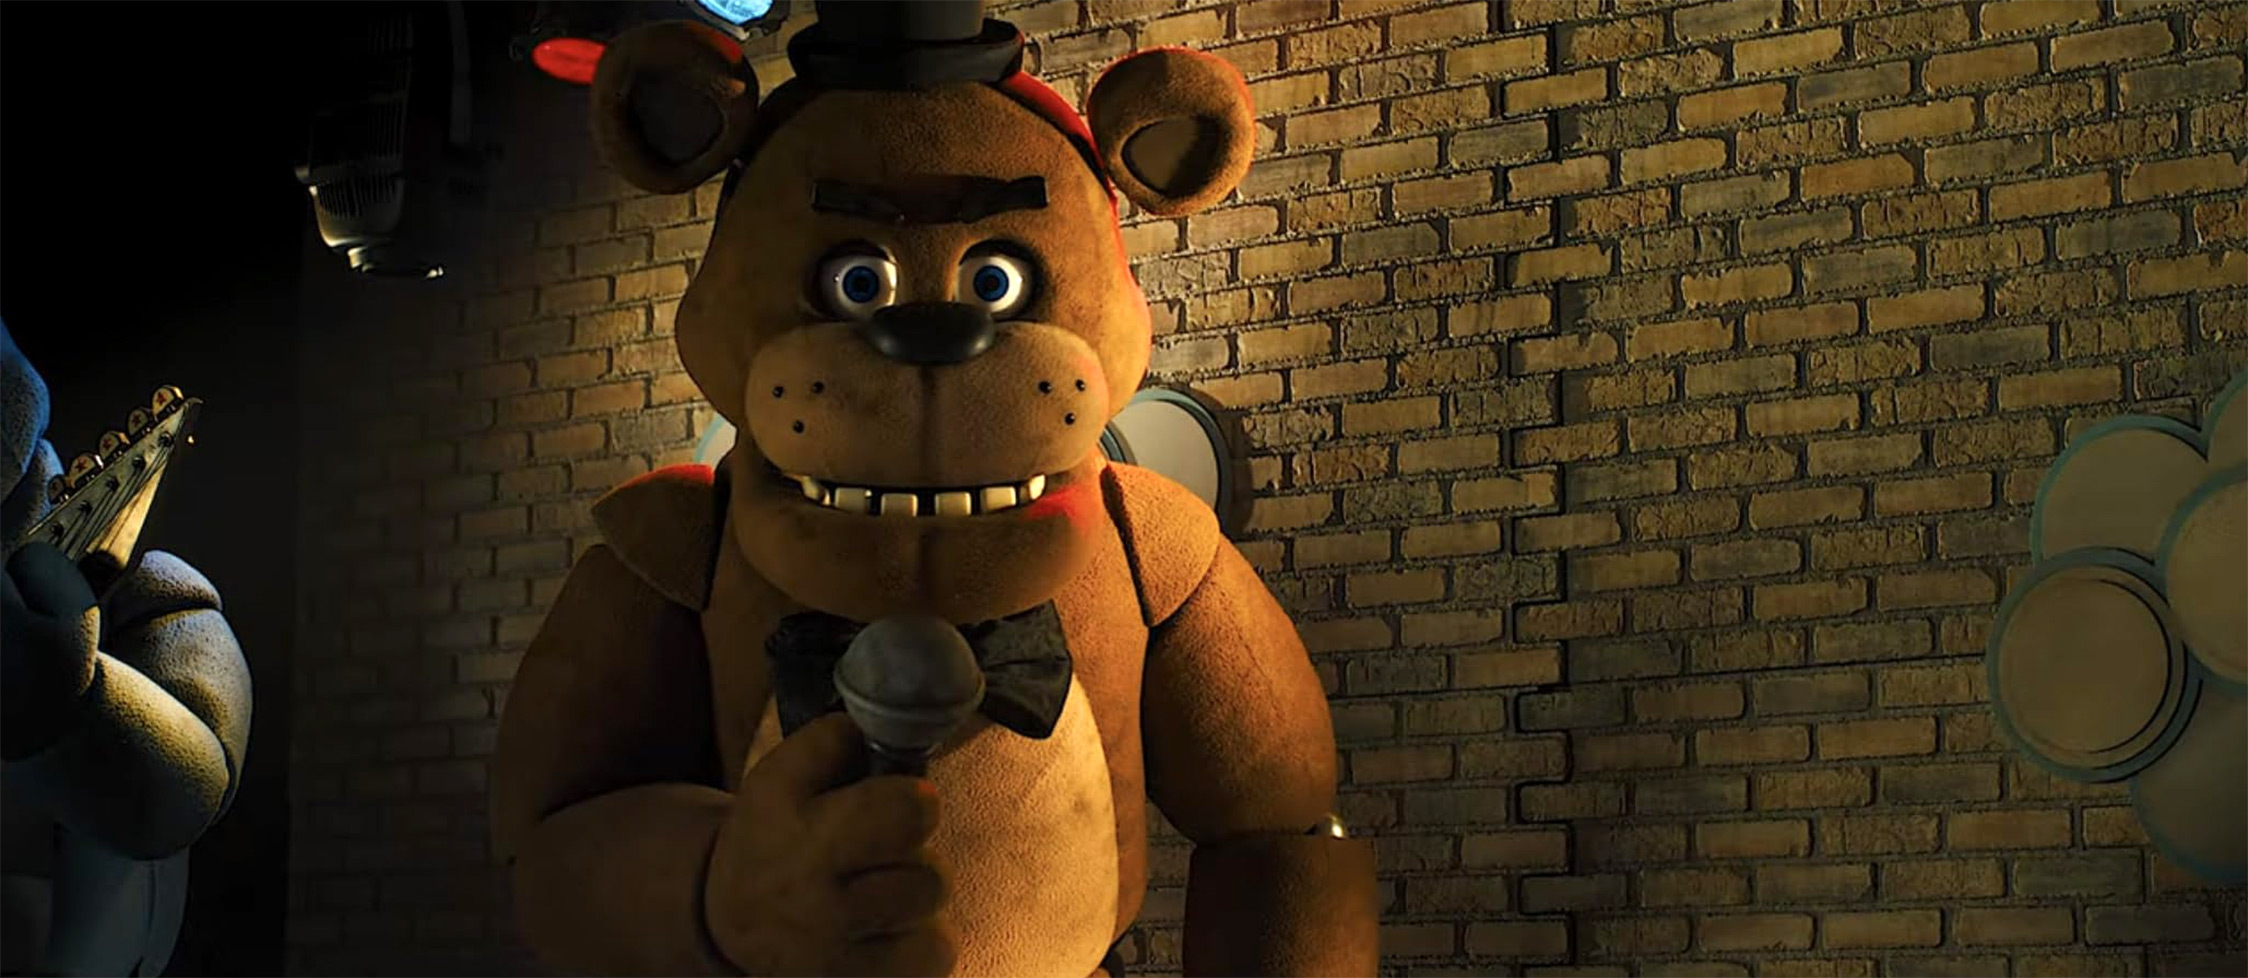 Are you ready for a new slice of Five Nights at Freddy's? - JB Hi-Fi